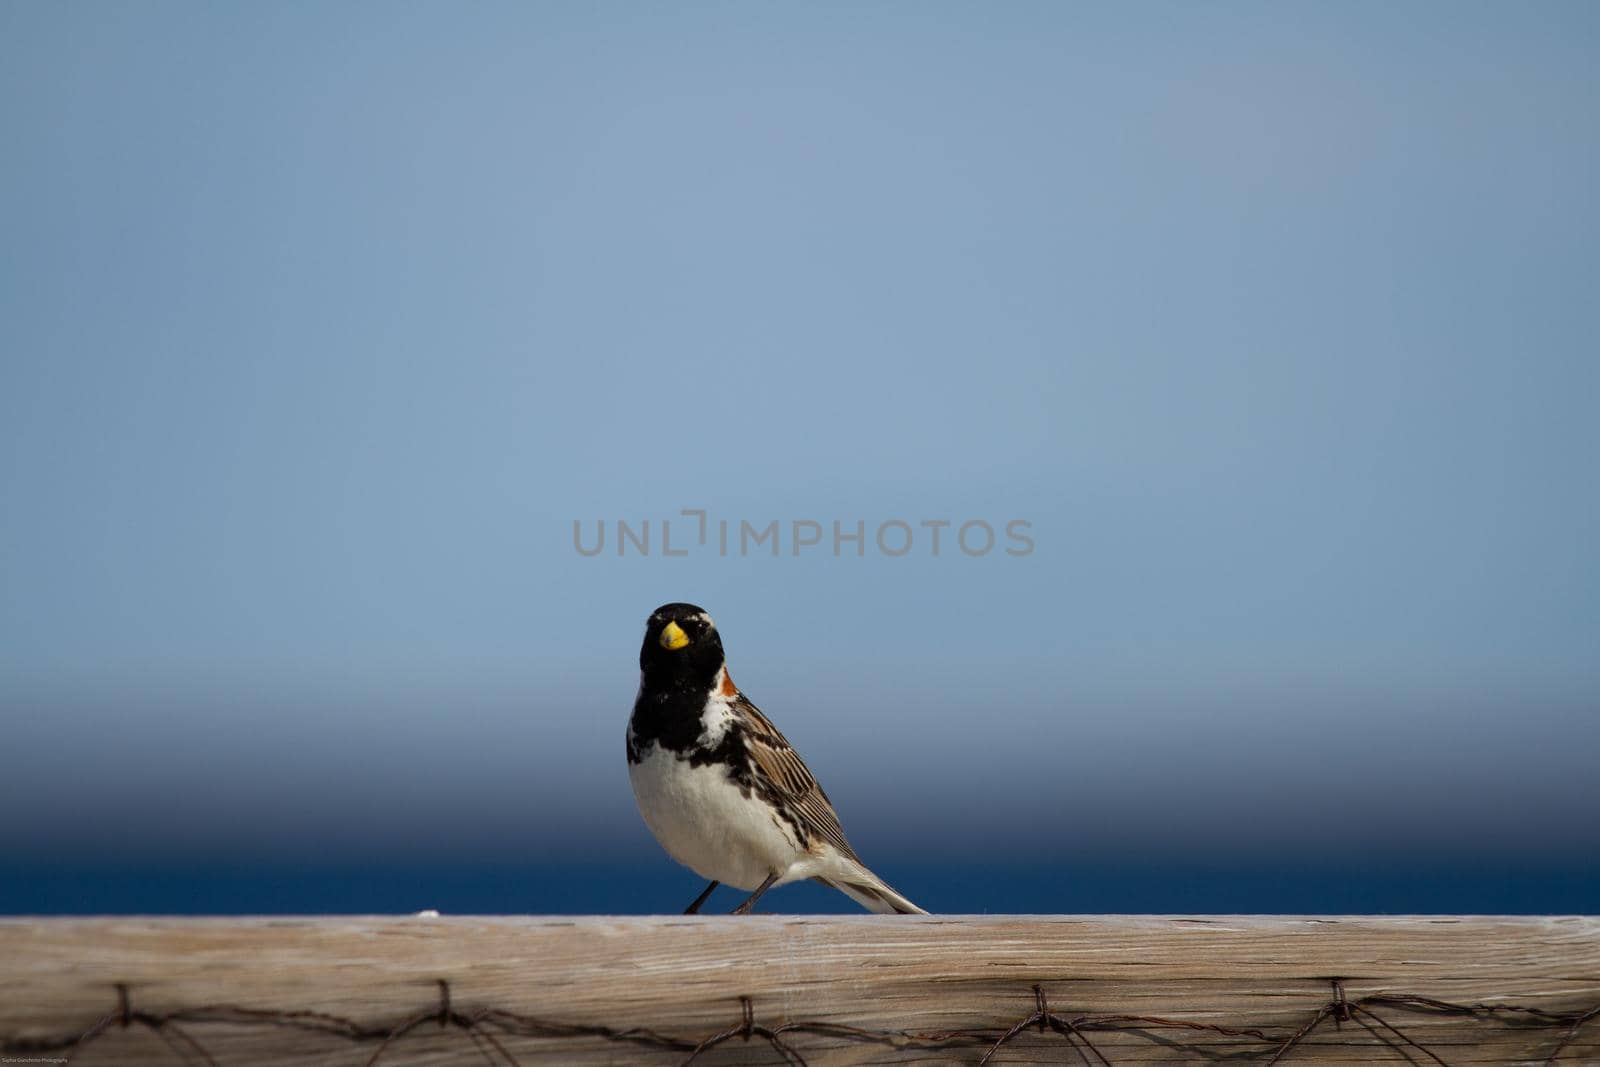 Lapland longspur bird standing on a post with blue skies in the background, near Arviat, Nunavut Canada. High quality photo